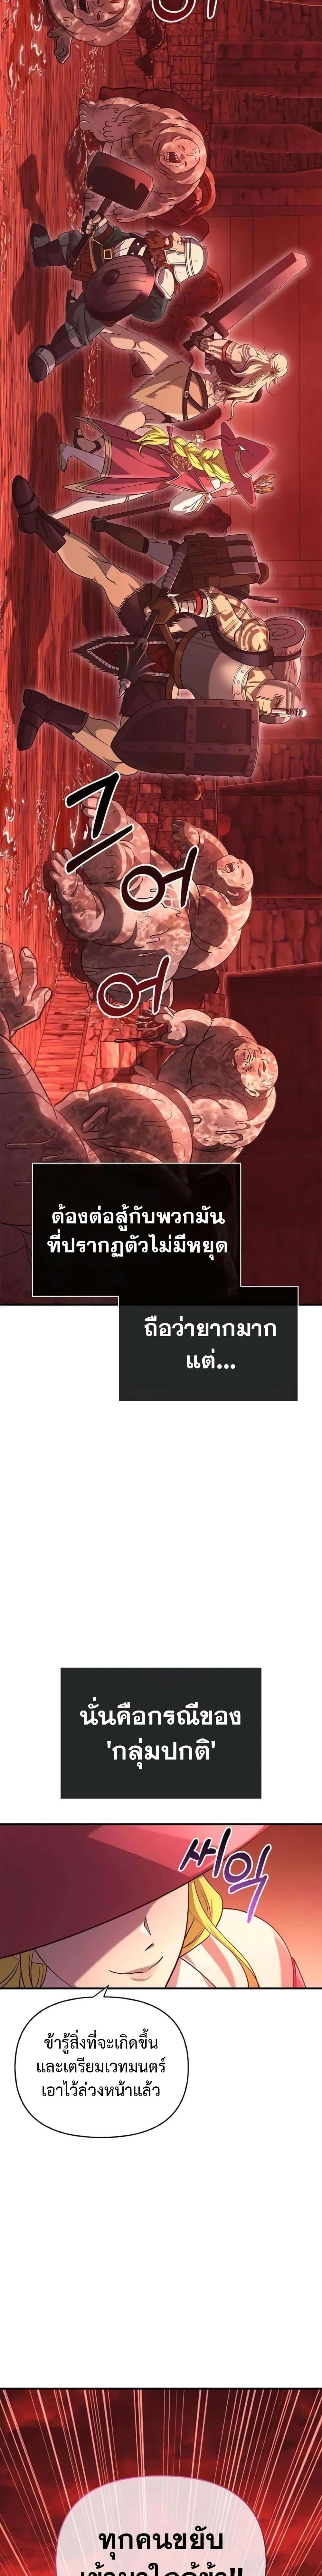 Surviving The Game as a Barbarian ตอนที่ 24 (28)